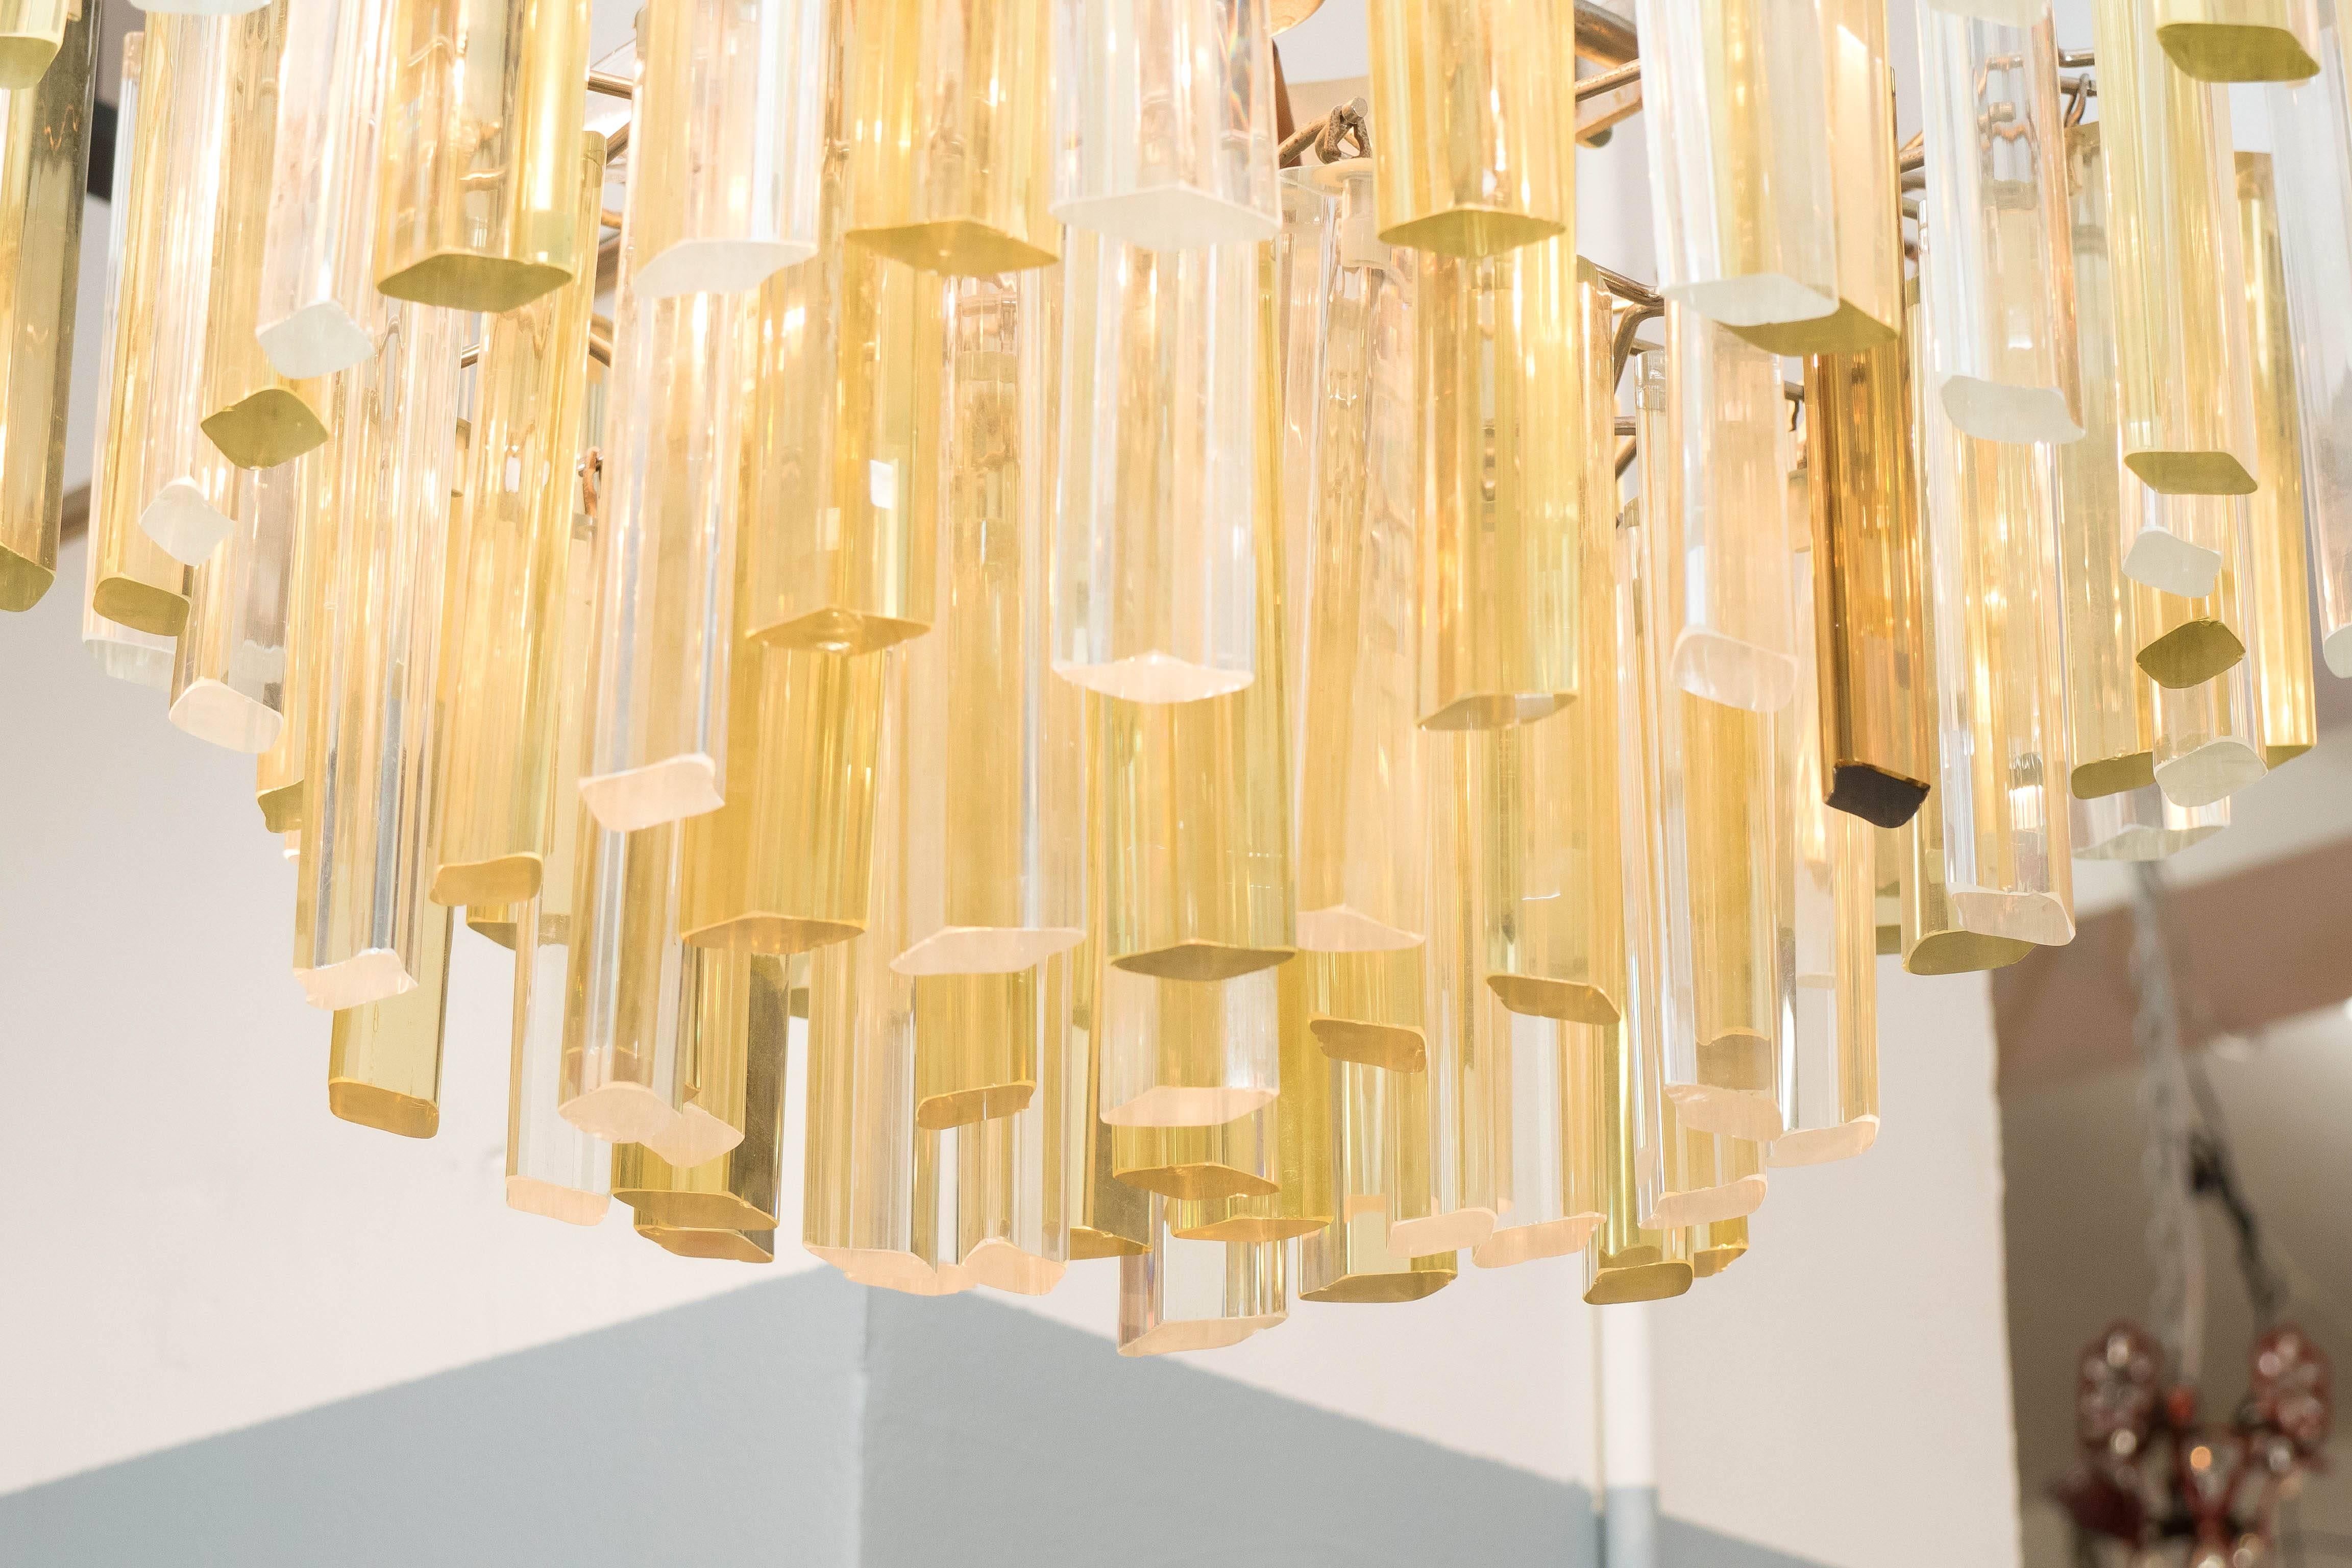 A chandelier by Venini, produced circa 1970s, with three tiers of suspended glass prisms, in clear and gold tones. Requires four candelabra base bulbs. This light fixture remains in very good condition, with no loss of prisms or presence of damage